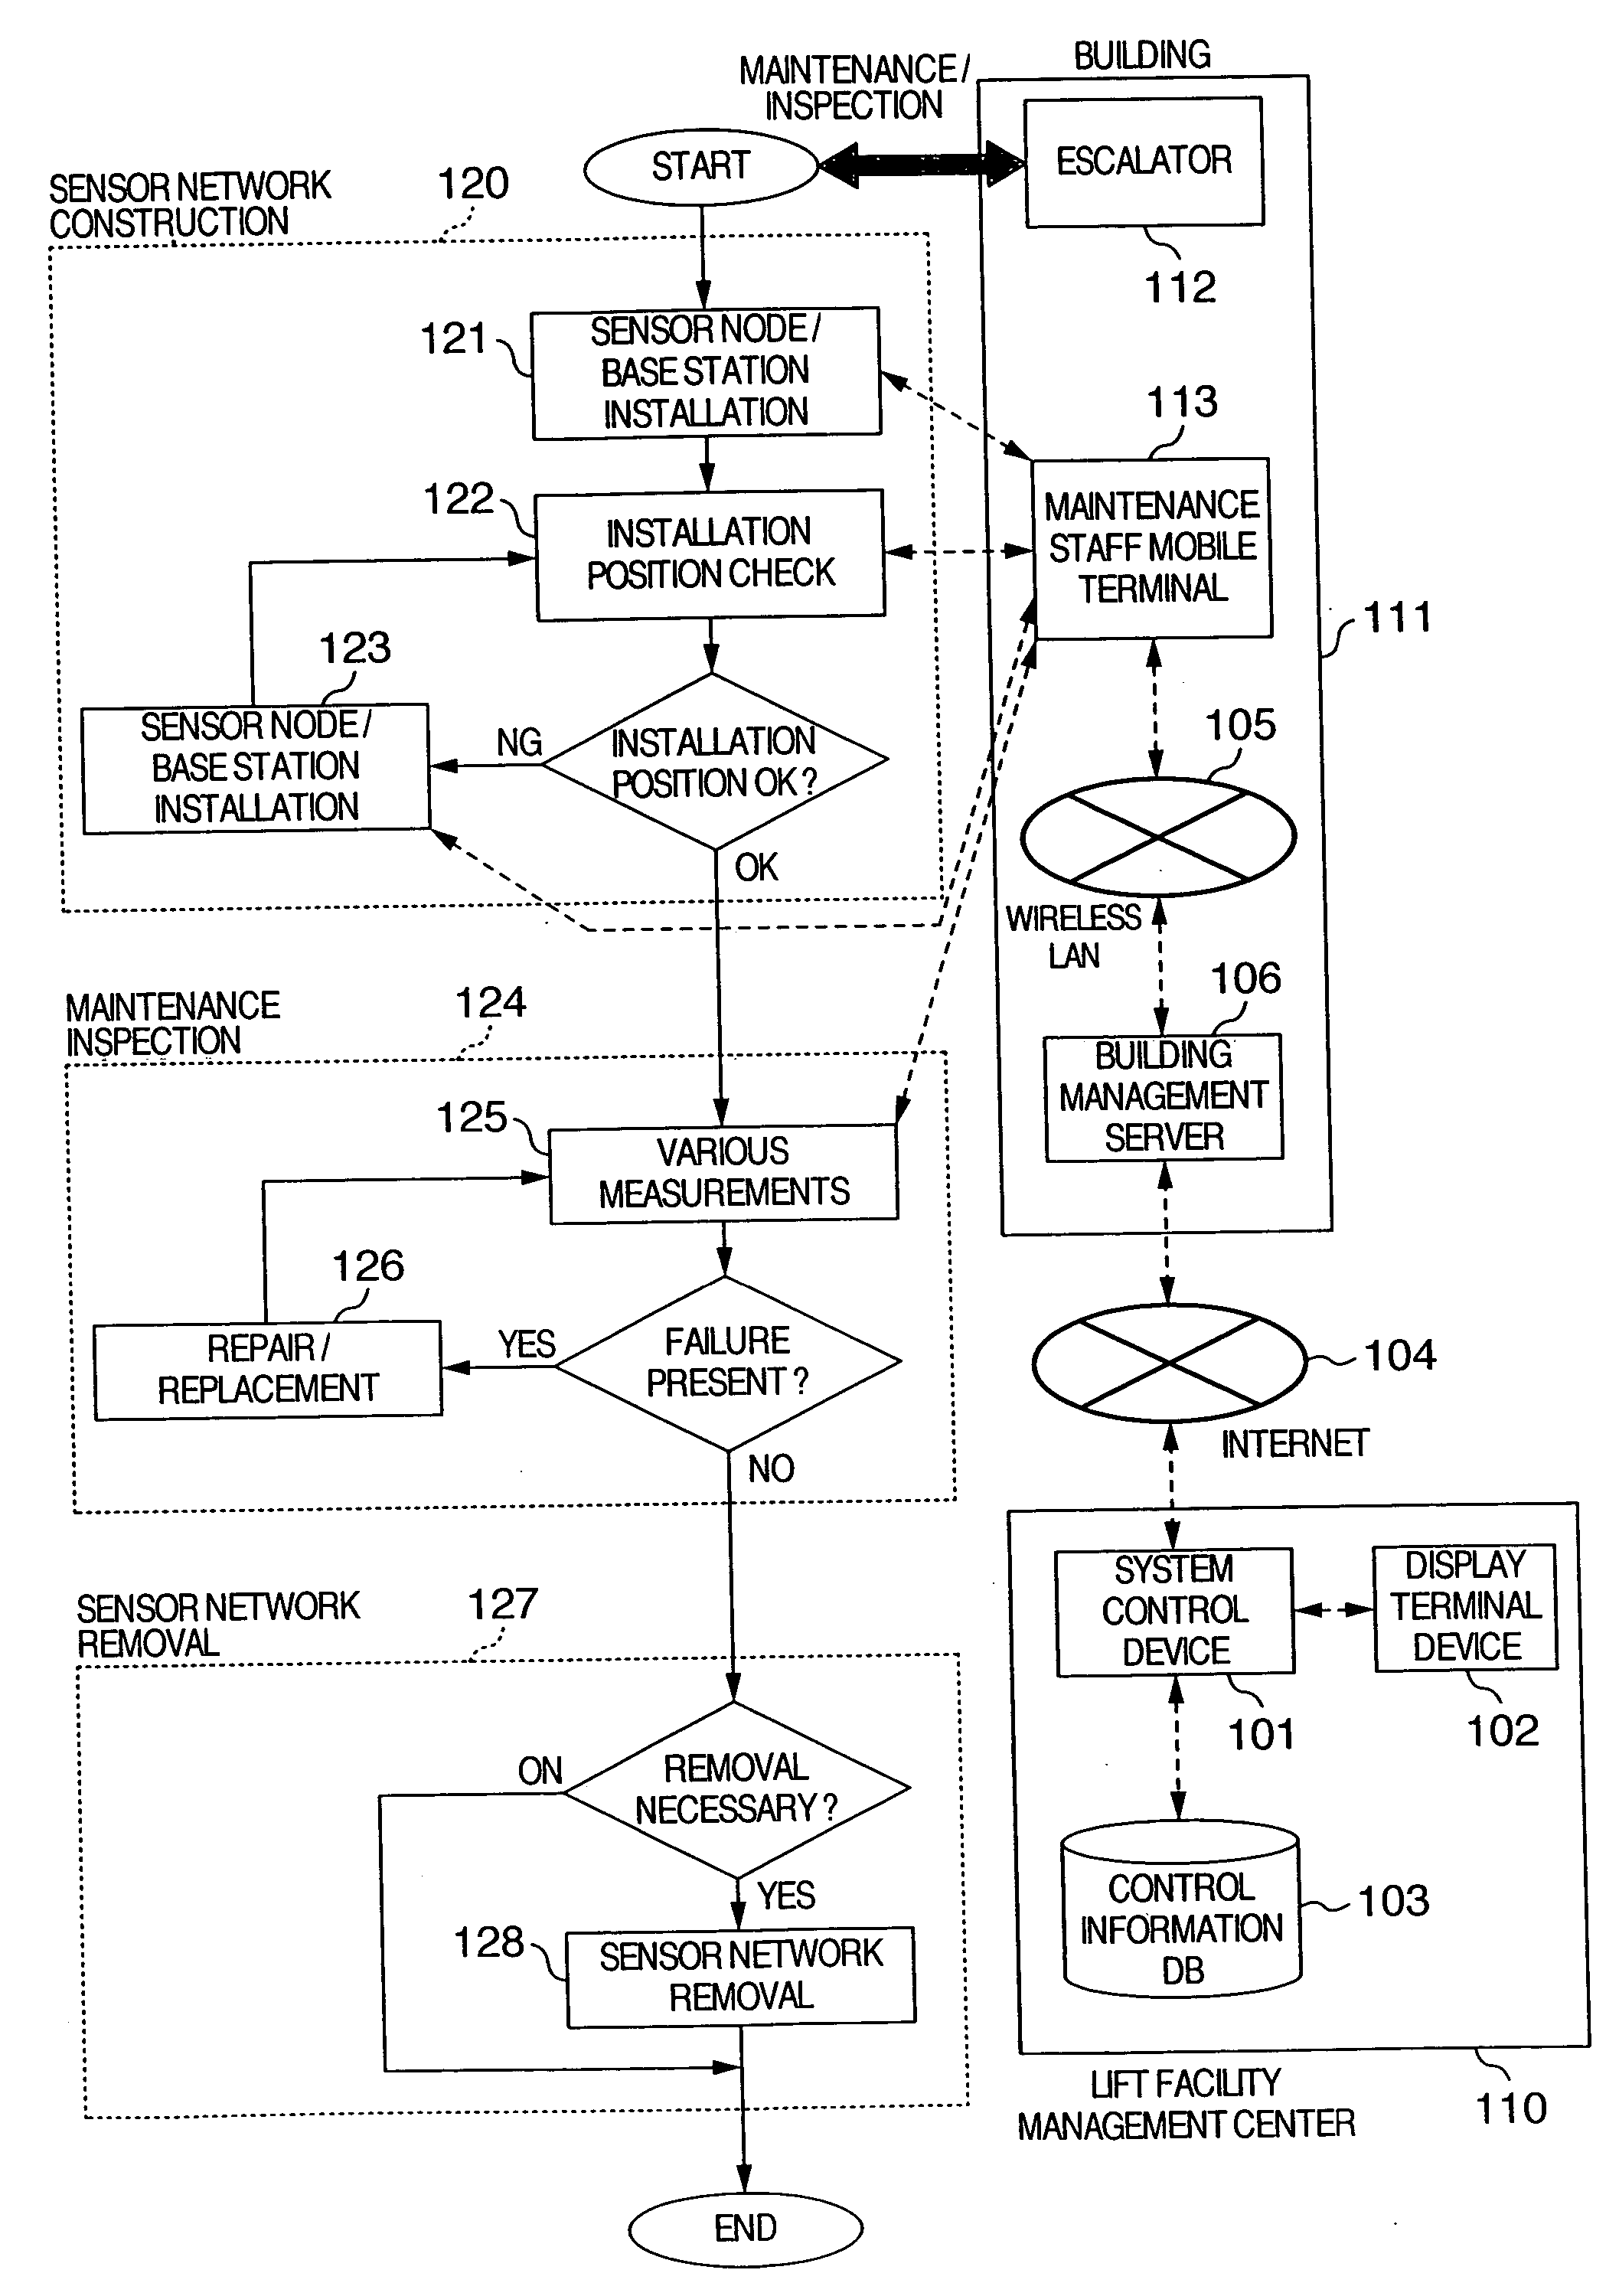 Method for inspecting and monitoring building, structure, or facilities accompanying them